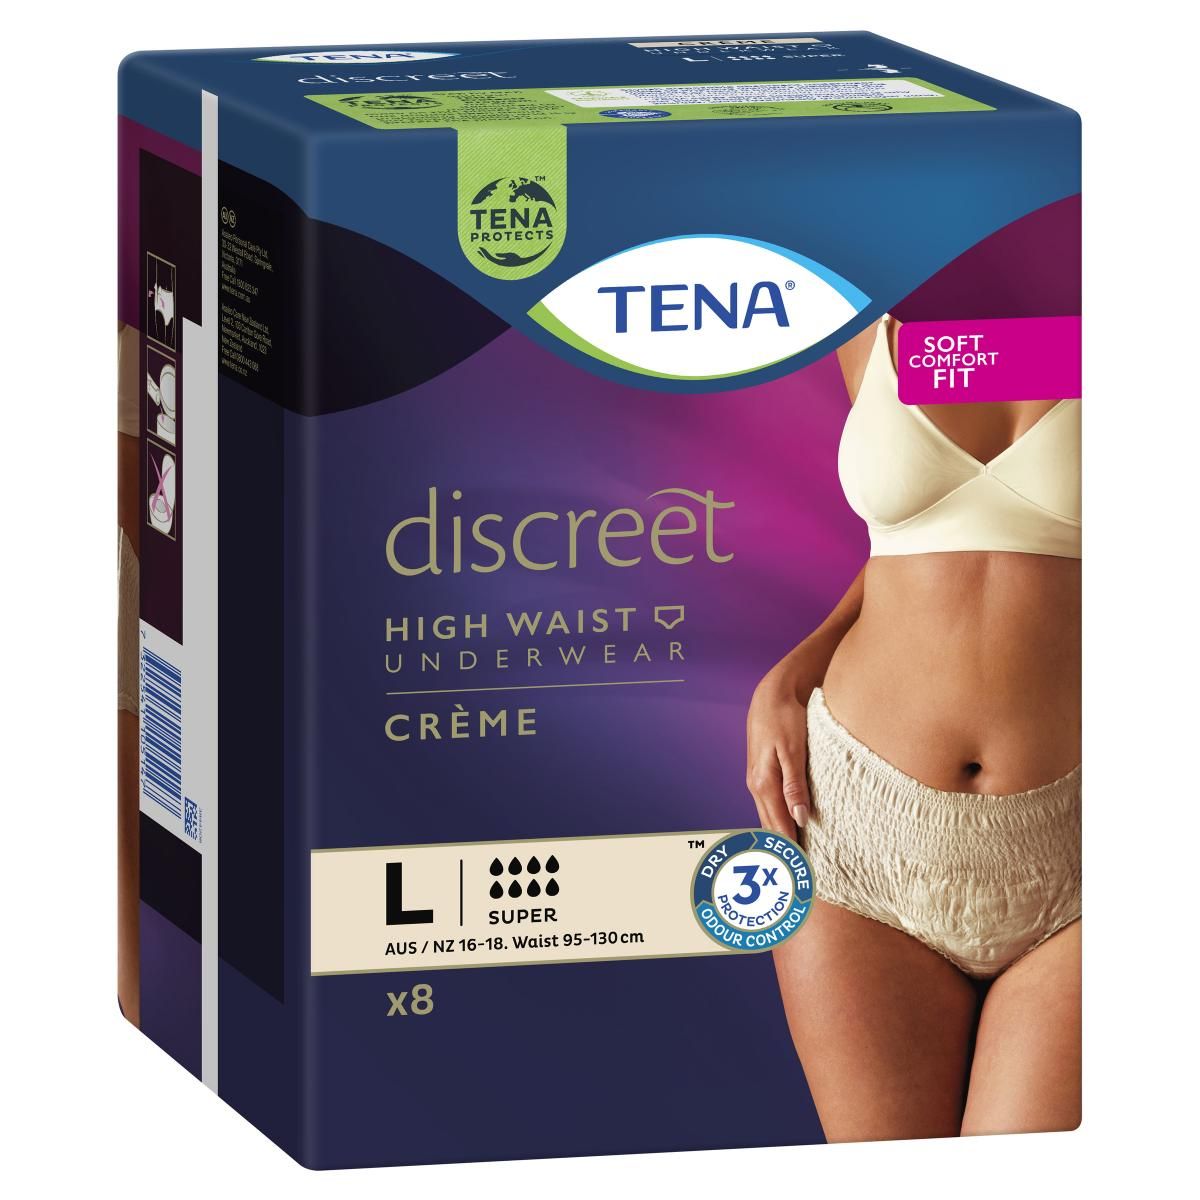 Period-Proof Organic Cotton Thong - 1 Tampon Absorption – Viita Protection